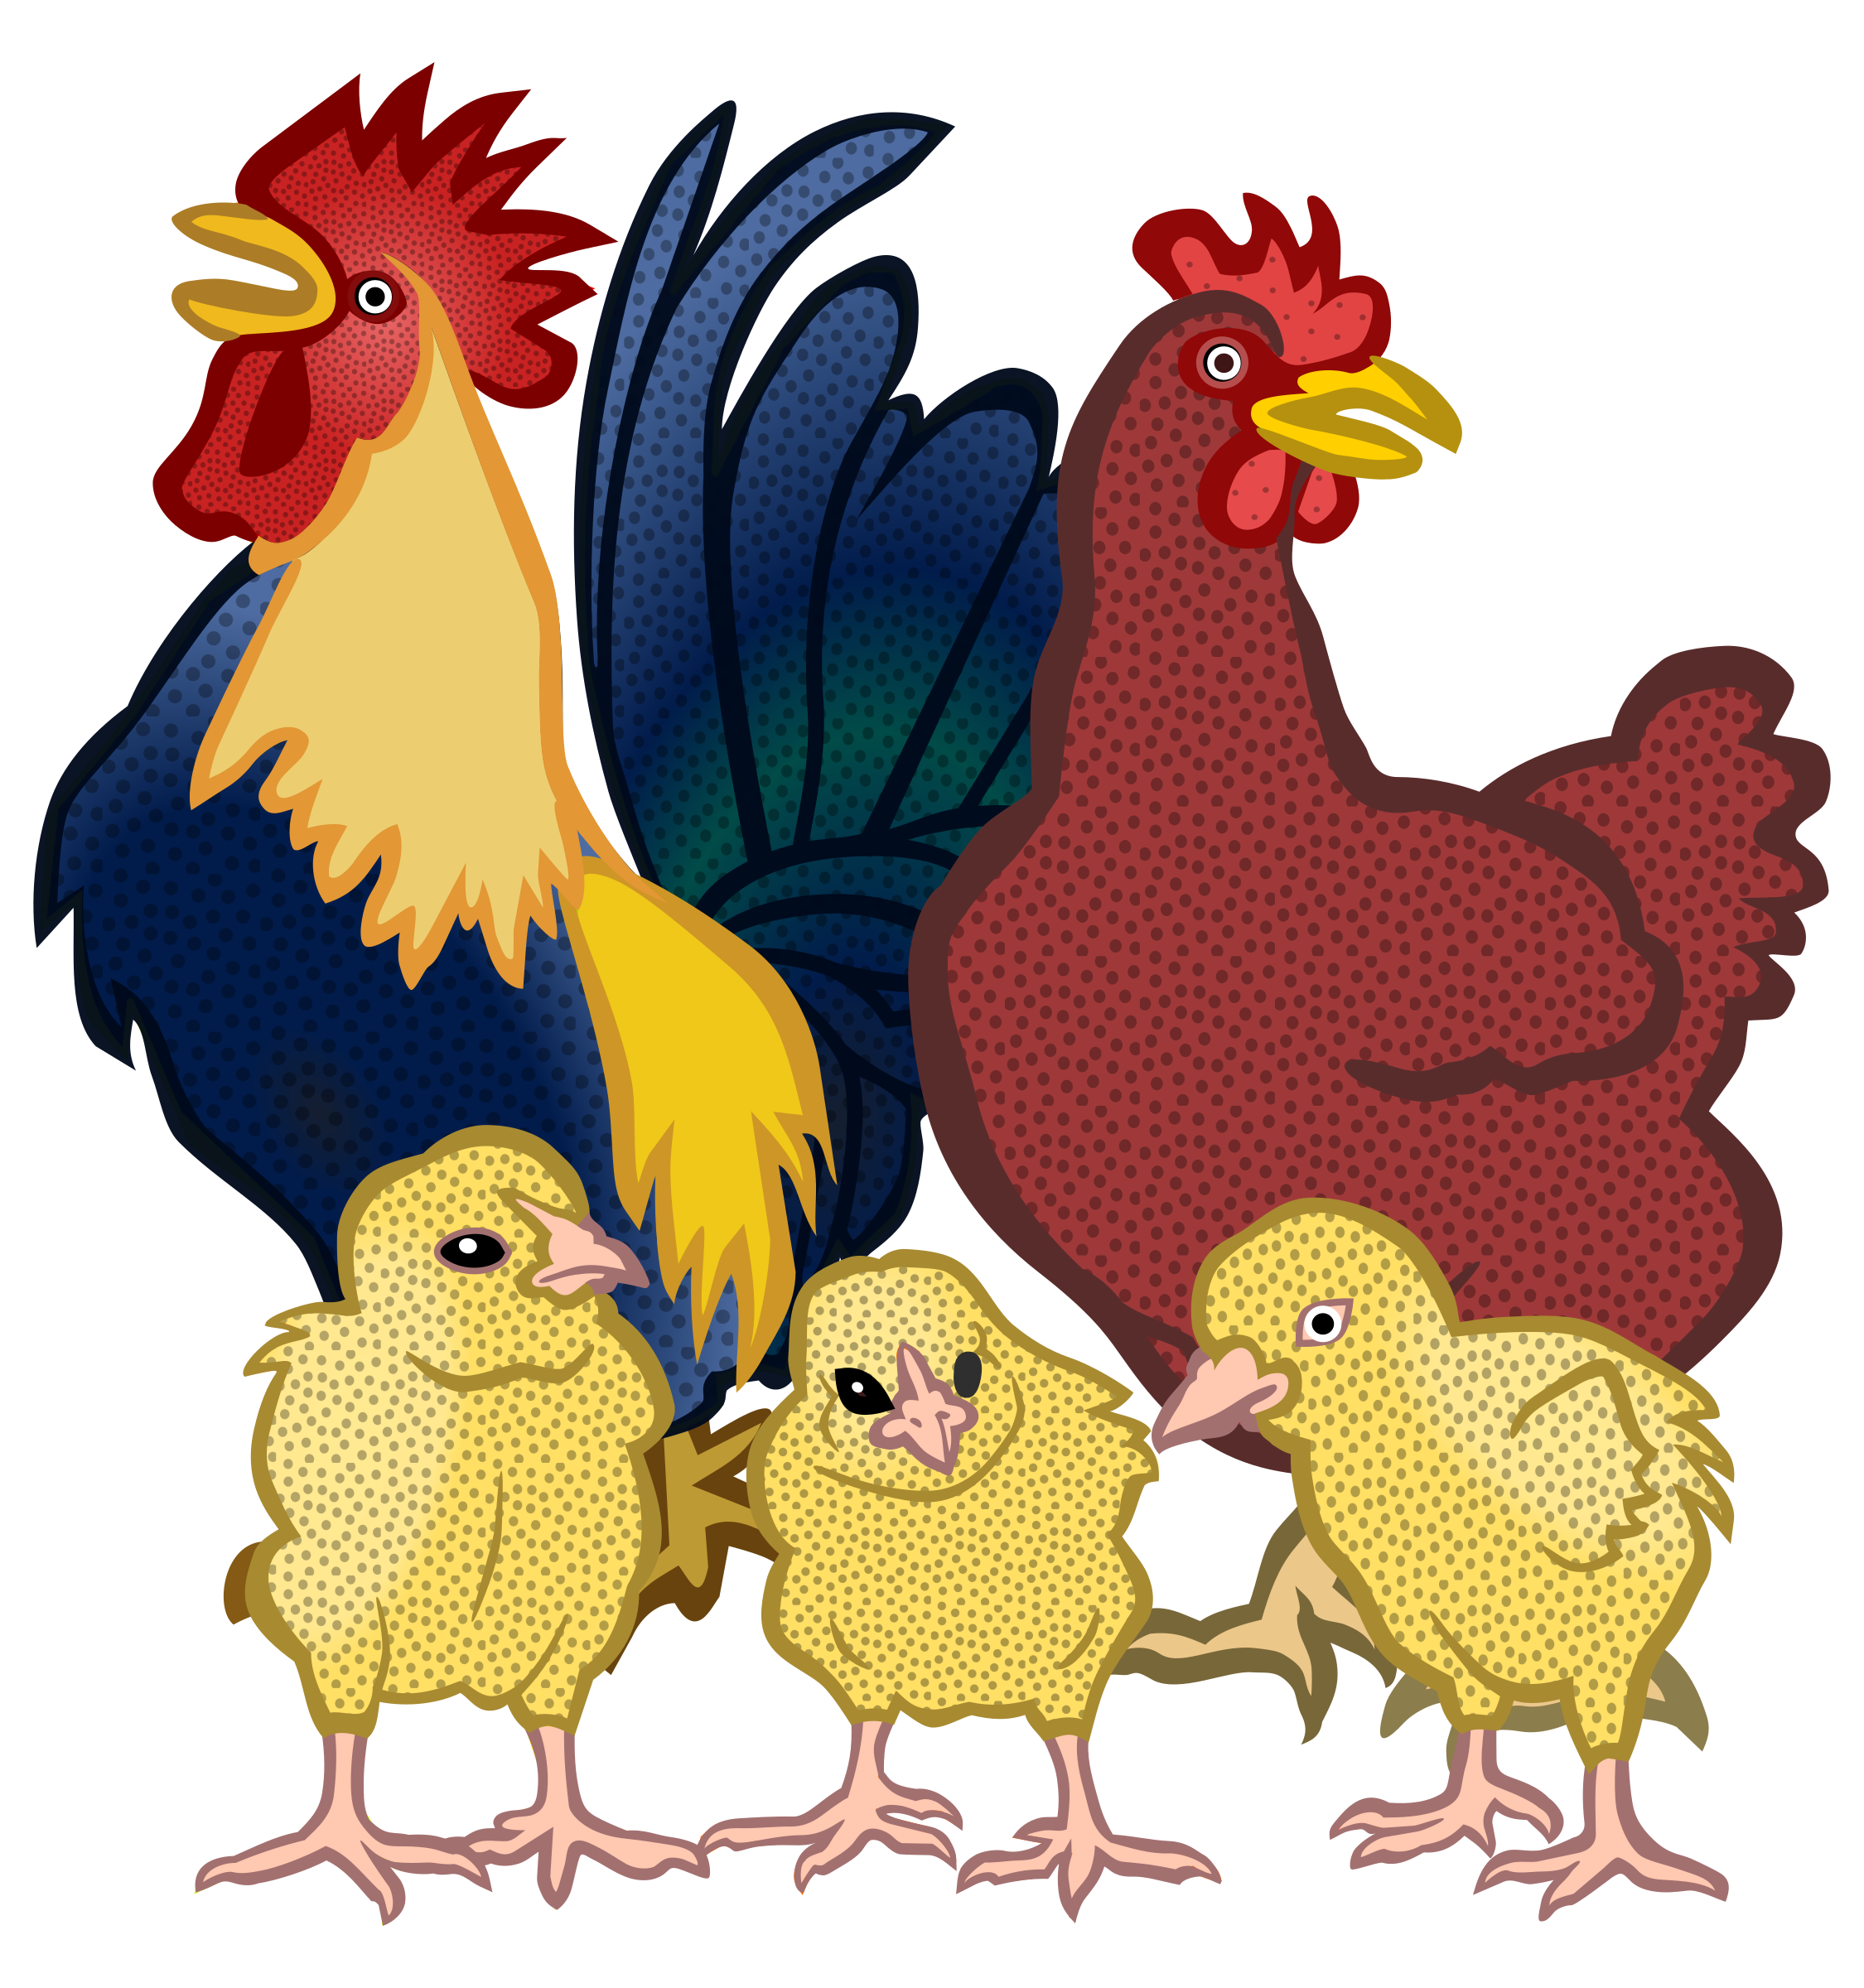 Free Chicken Vector Png, Download Free Chicken Vector Png png images ...